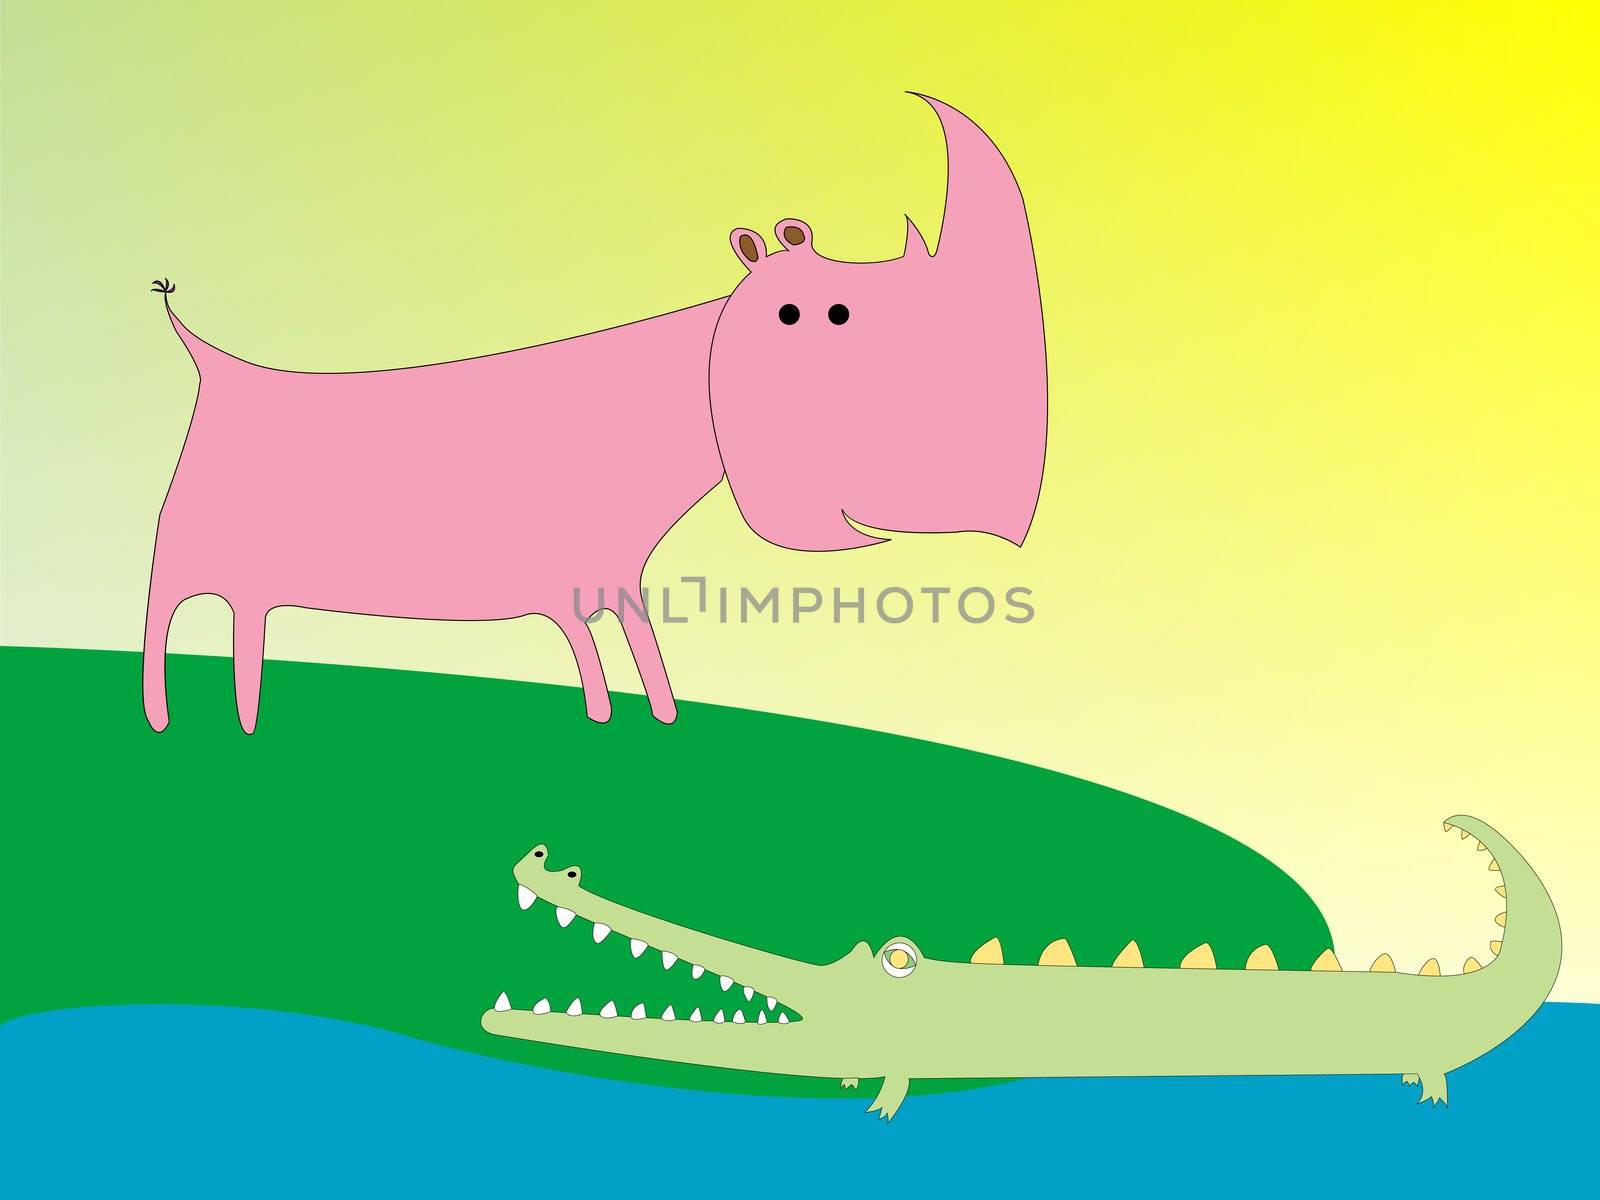 drawing of a crocodile and rhino, vector art illustration; more drawings in my gallery